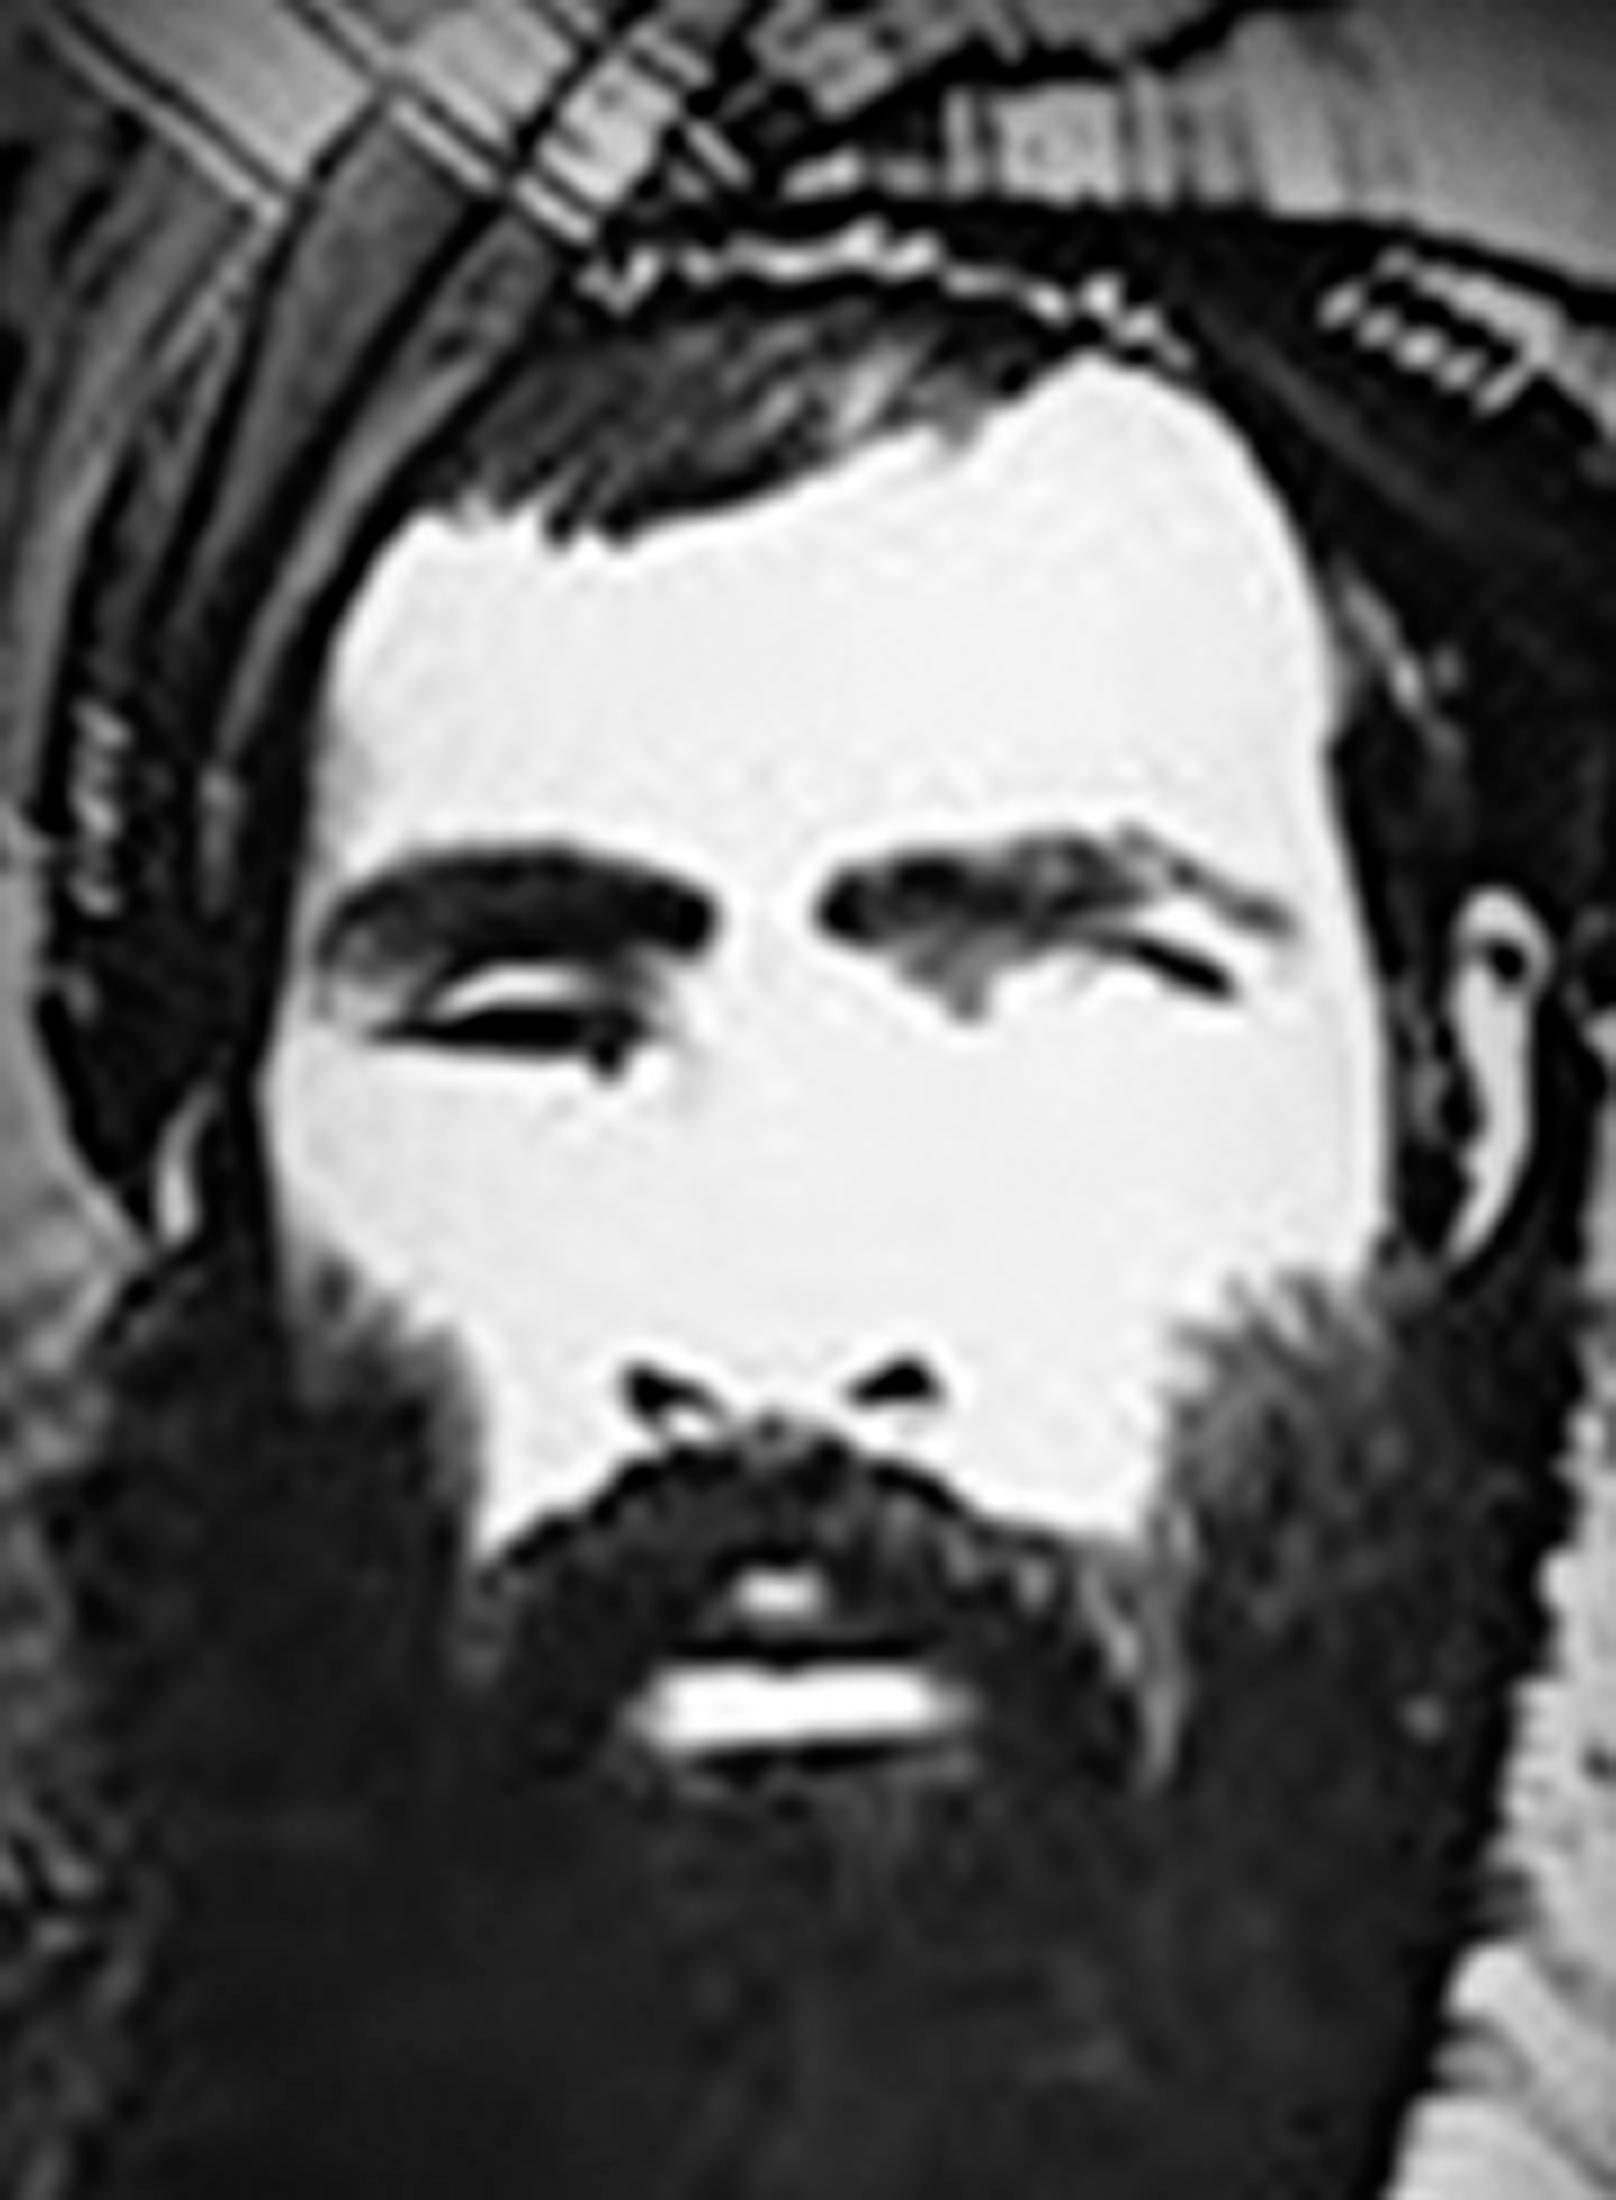 Mullah Omar, the leader and founder of the Taliban, will be remembered in the movement's propaganda poetry